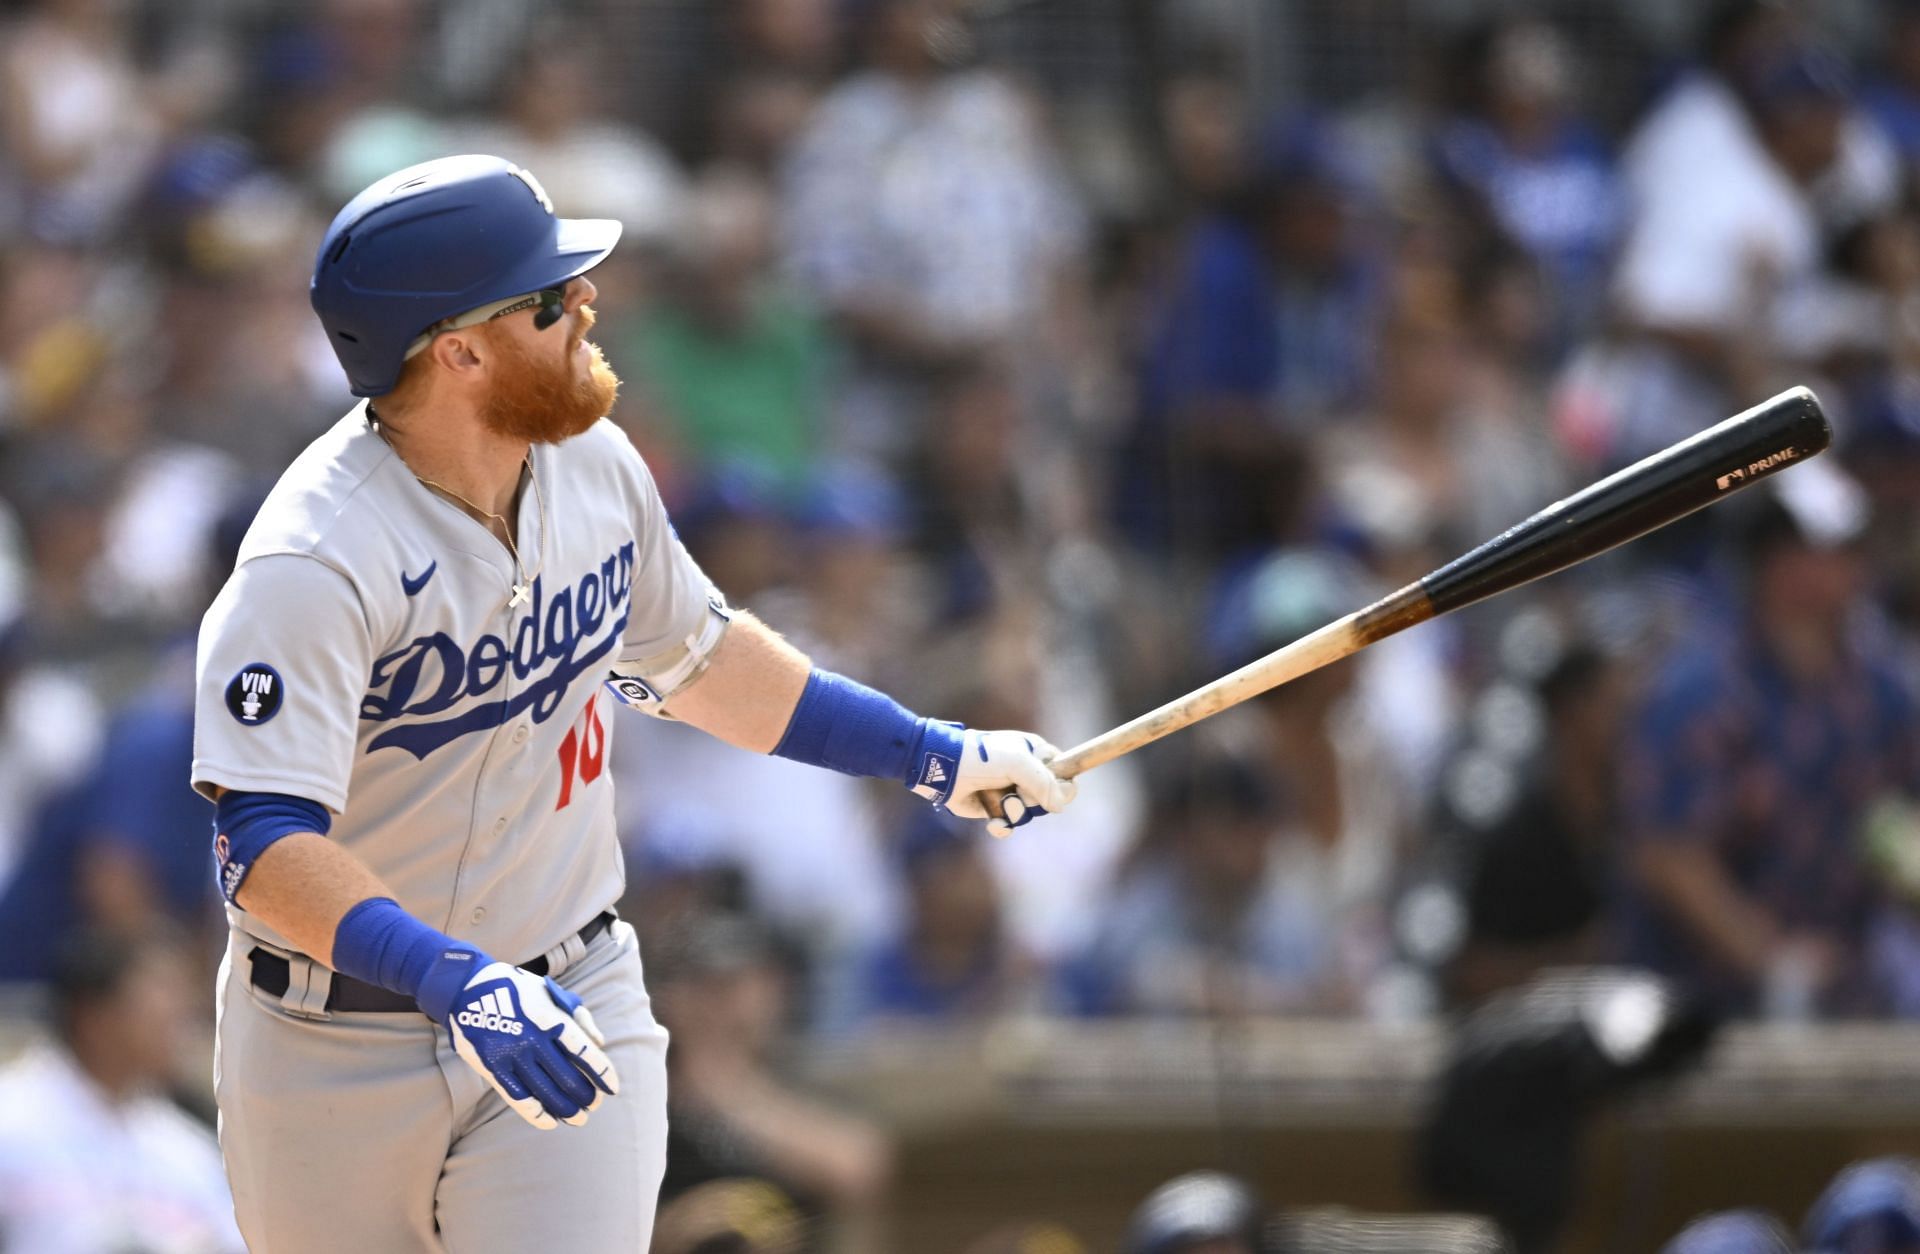 Red Sox: MLB fans react to umpire whiffing Justin Turner strike call